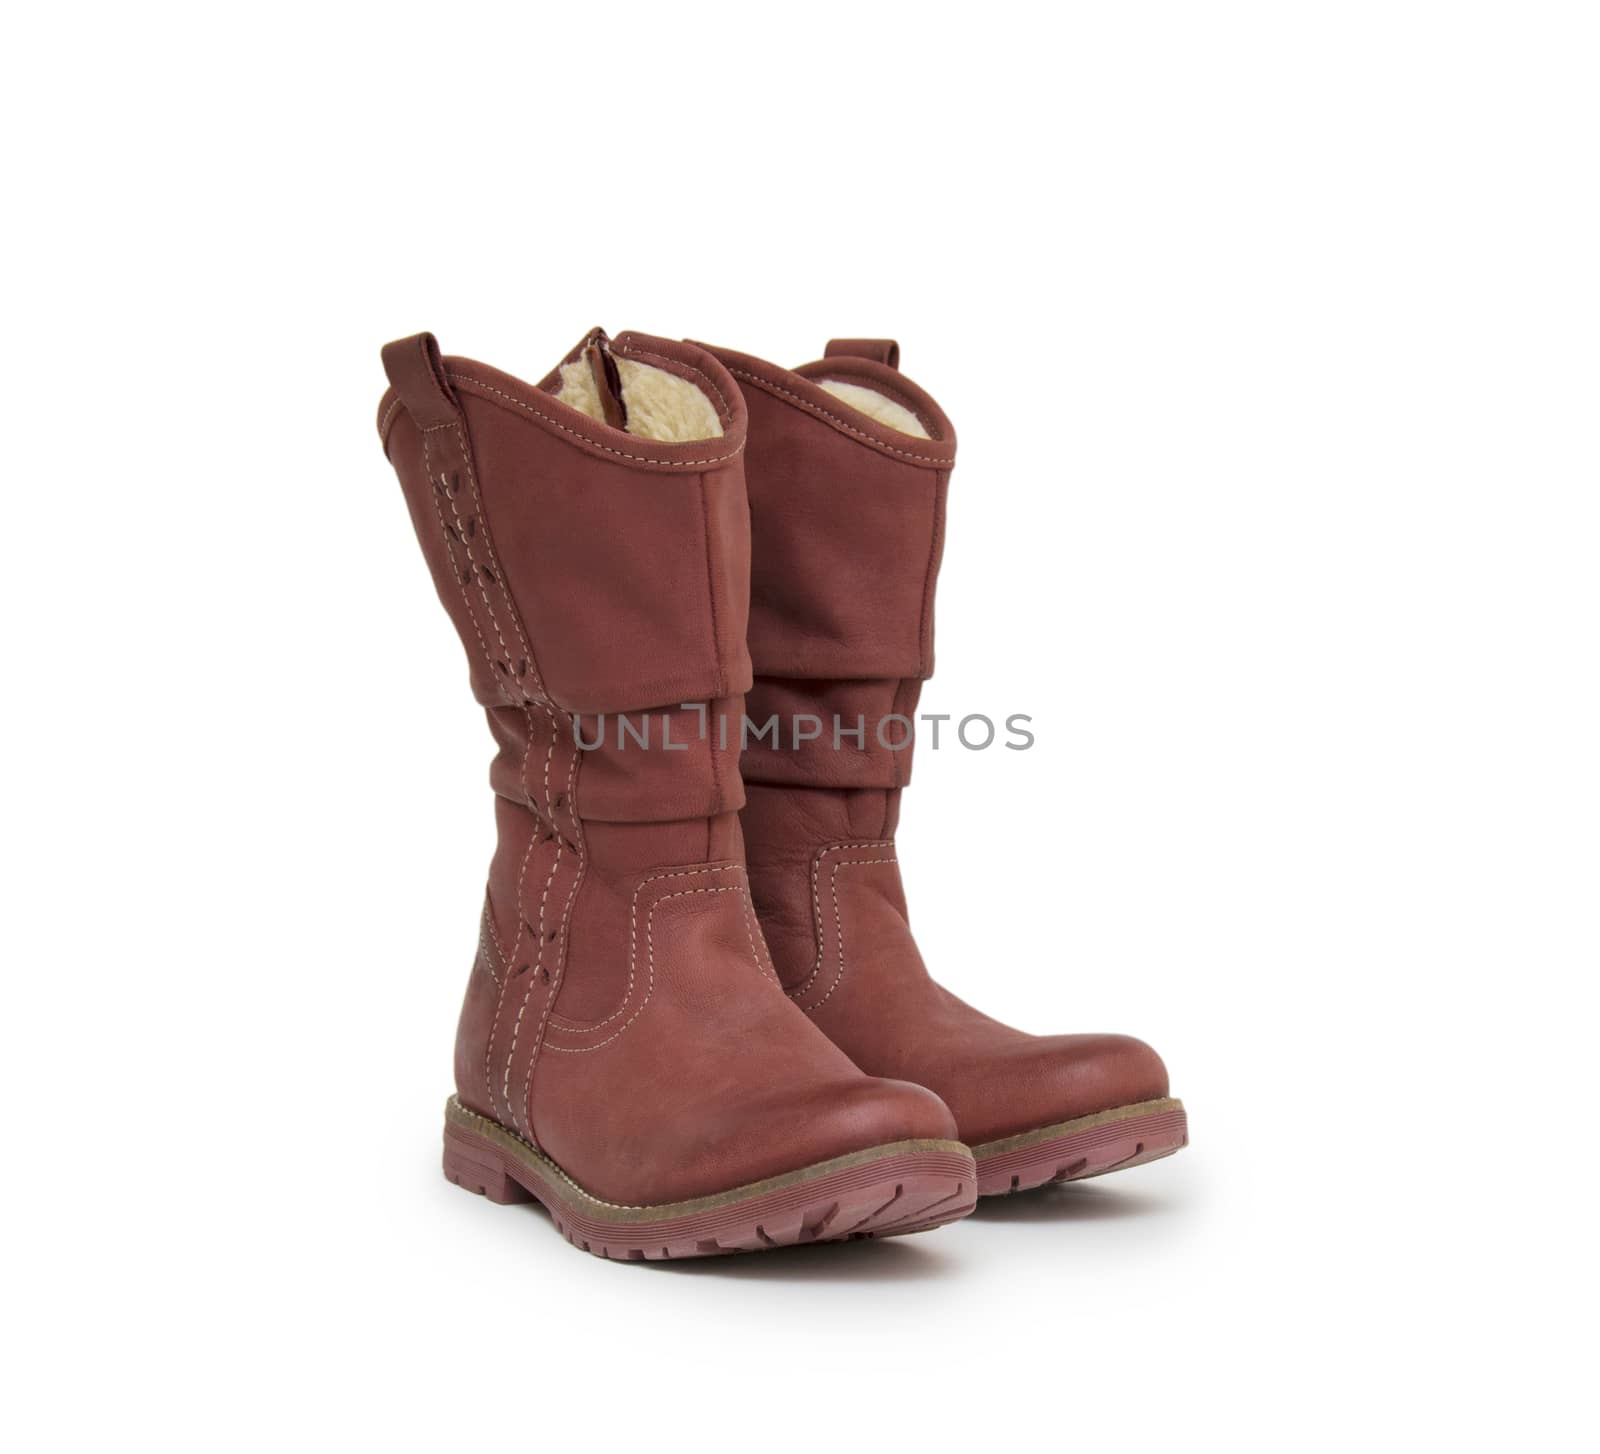 pair of boots isolated on a white background